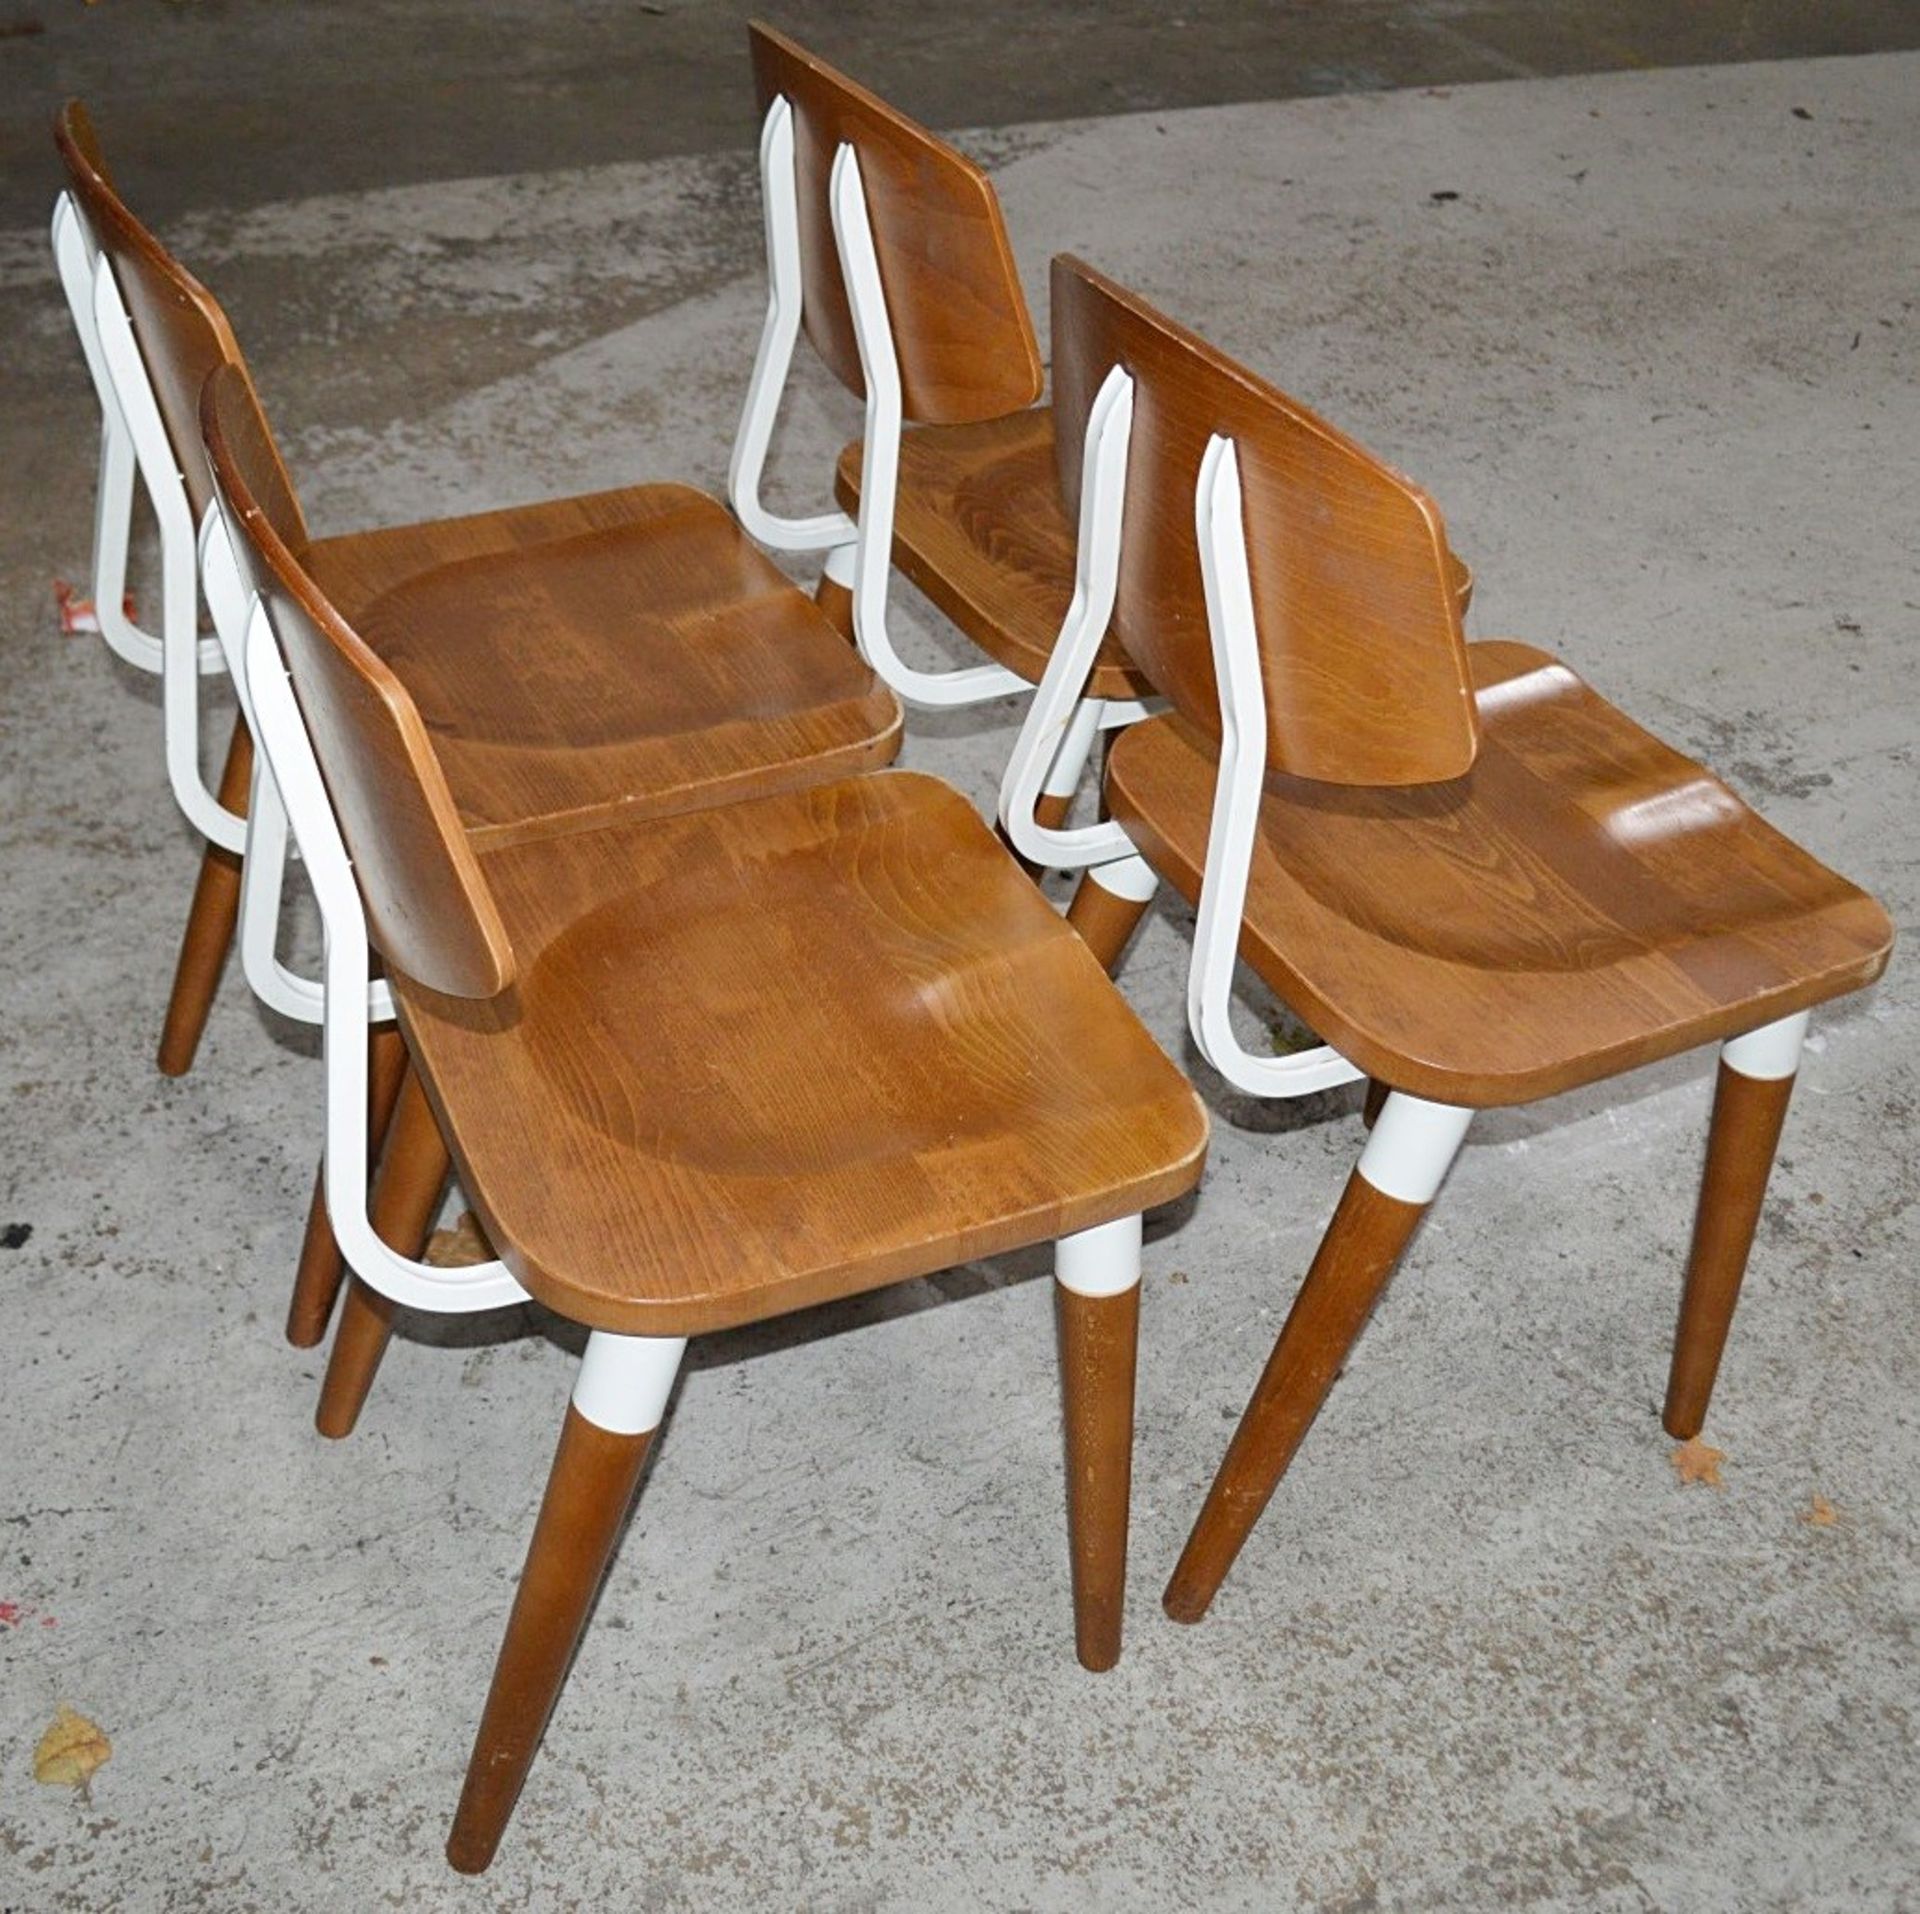 8 x Contemporary Commercial Dining Chairs With A Sturdy Wood And Metal Construction - Image 9 of 10